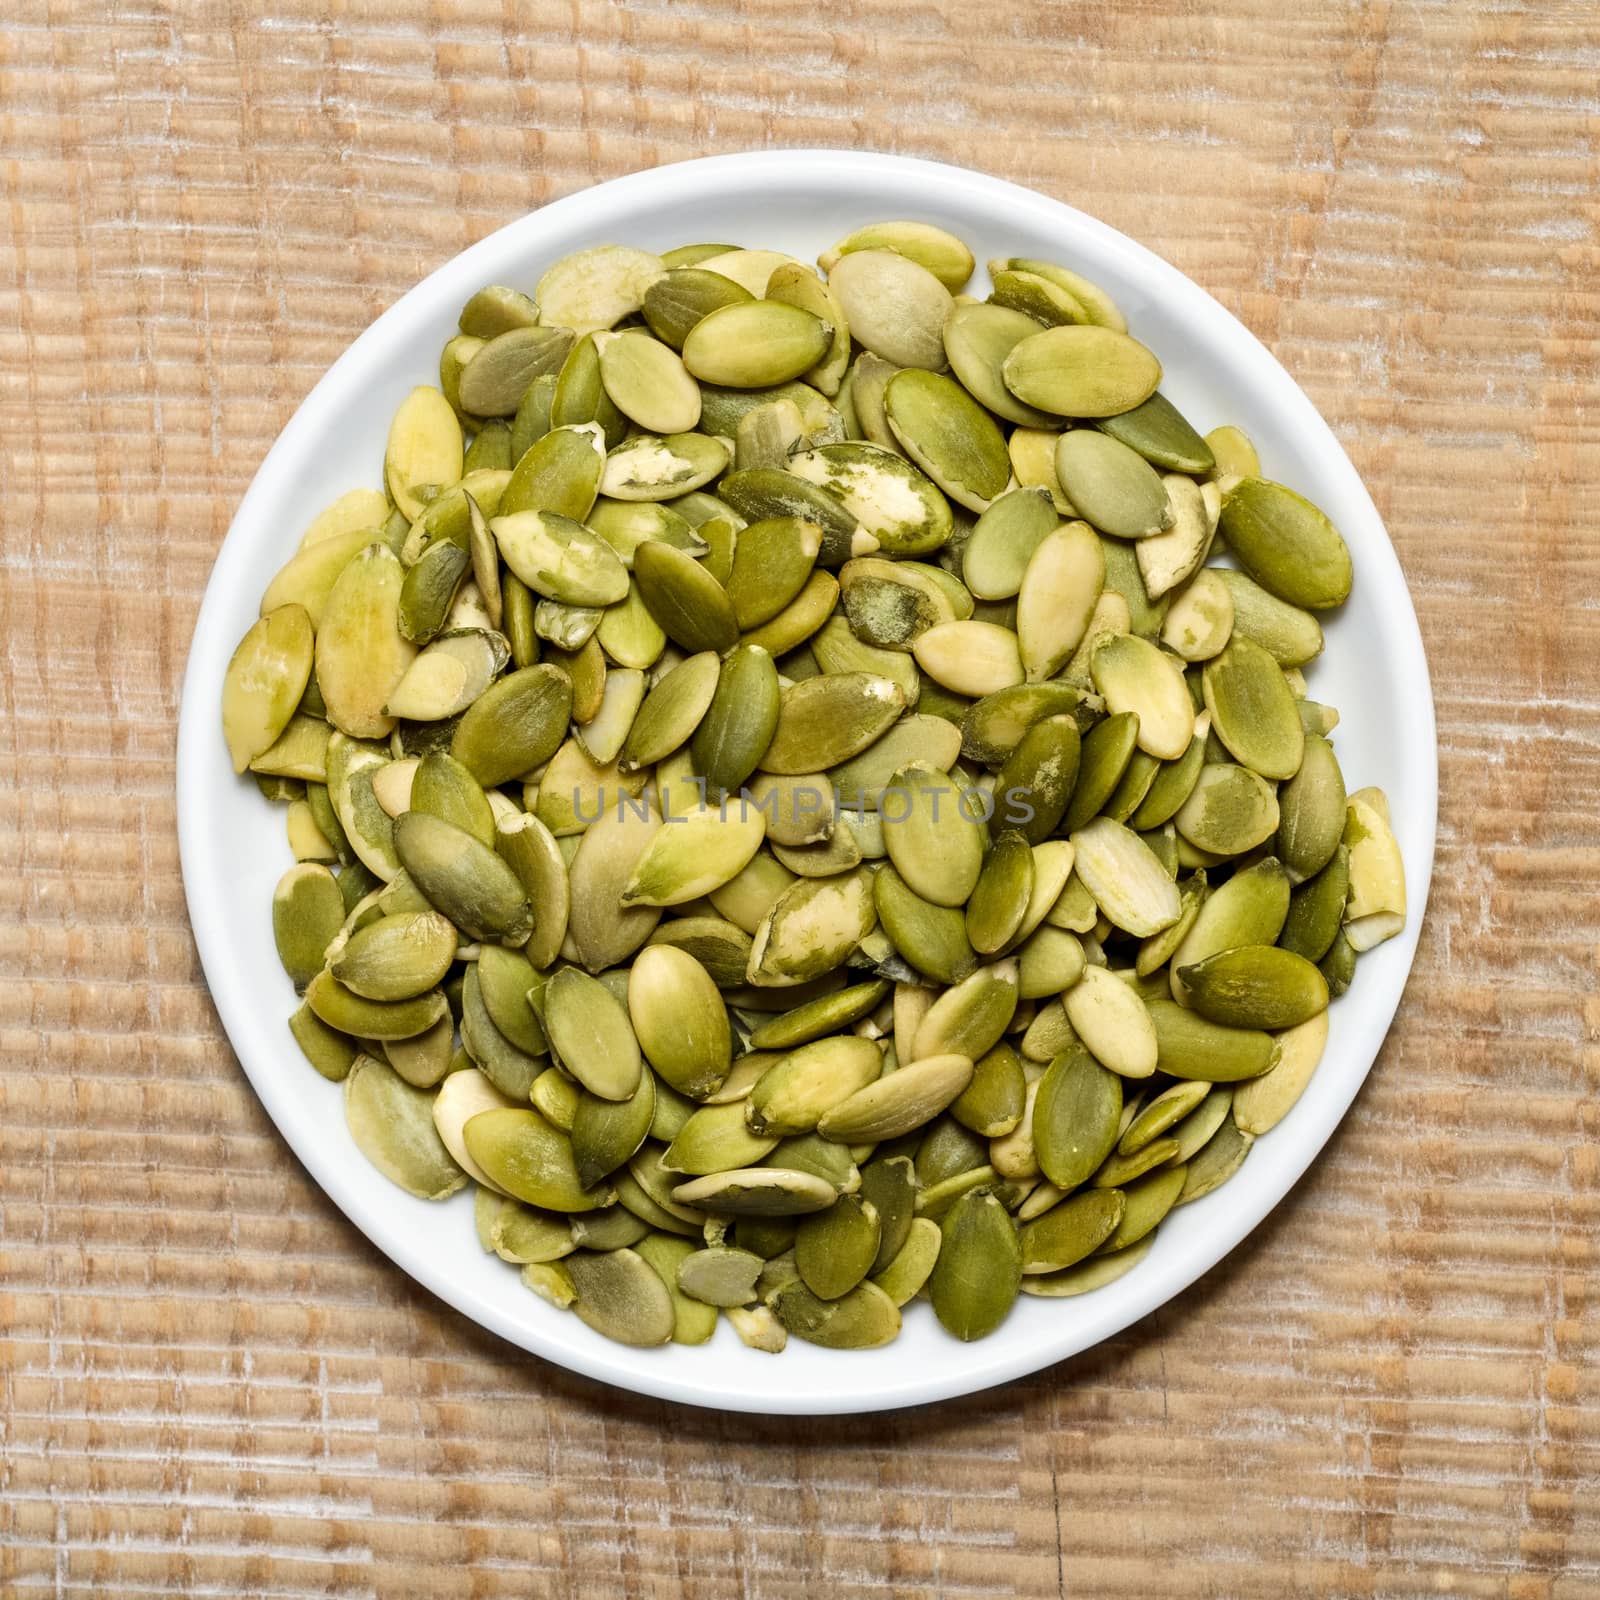 Pumpkin seeds in the plate, on wooden background by Gaina